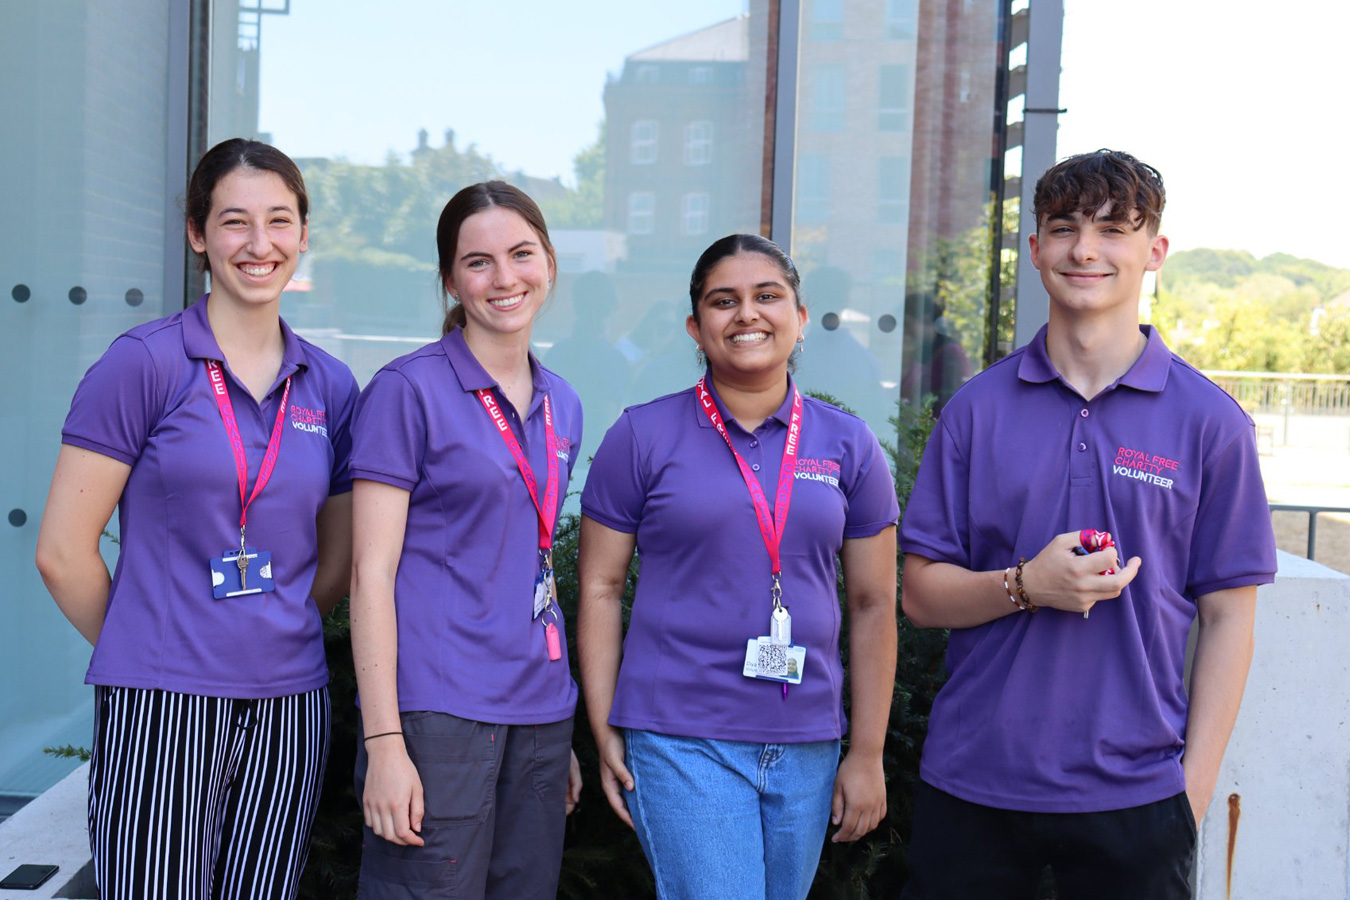 Four of our young volunteers outside Royal Free Hospital